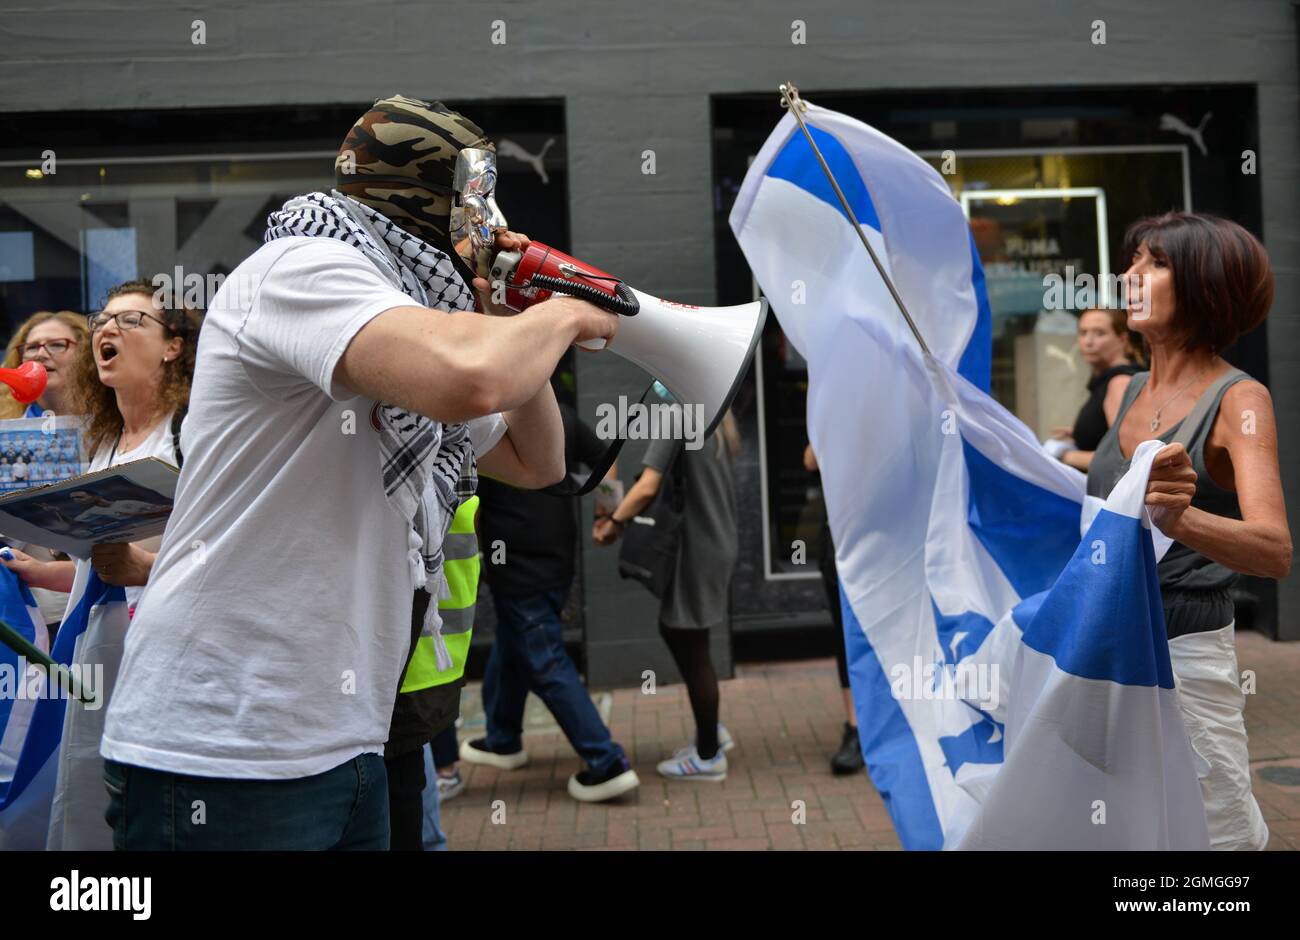 London, UK. 18th Sep, 2021. An activist with a megaphone confronts a counter protester with an Israeli flag during the demonstration.Boycott Puma protest organised by Palestine Solidarity Campaign and FOA (Friends of Al Aqsa) at Puma flagship store on Carnaby Street, London. Activists demonstrated against Puma's sponsorship of the IFA (Israel Football Association). (Photo by Thomas Krych/SOPA Images/Sipa USA) Credit: Sipa USA/Alamy Live News Stock Photo